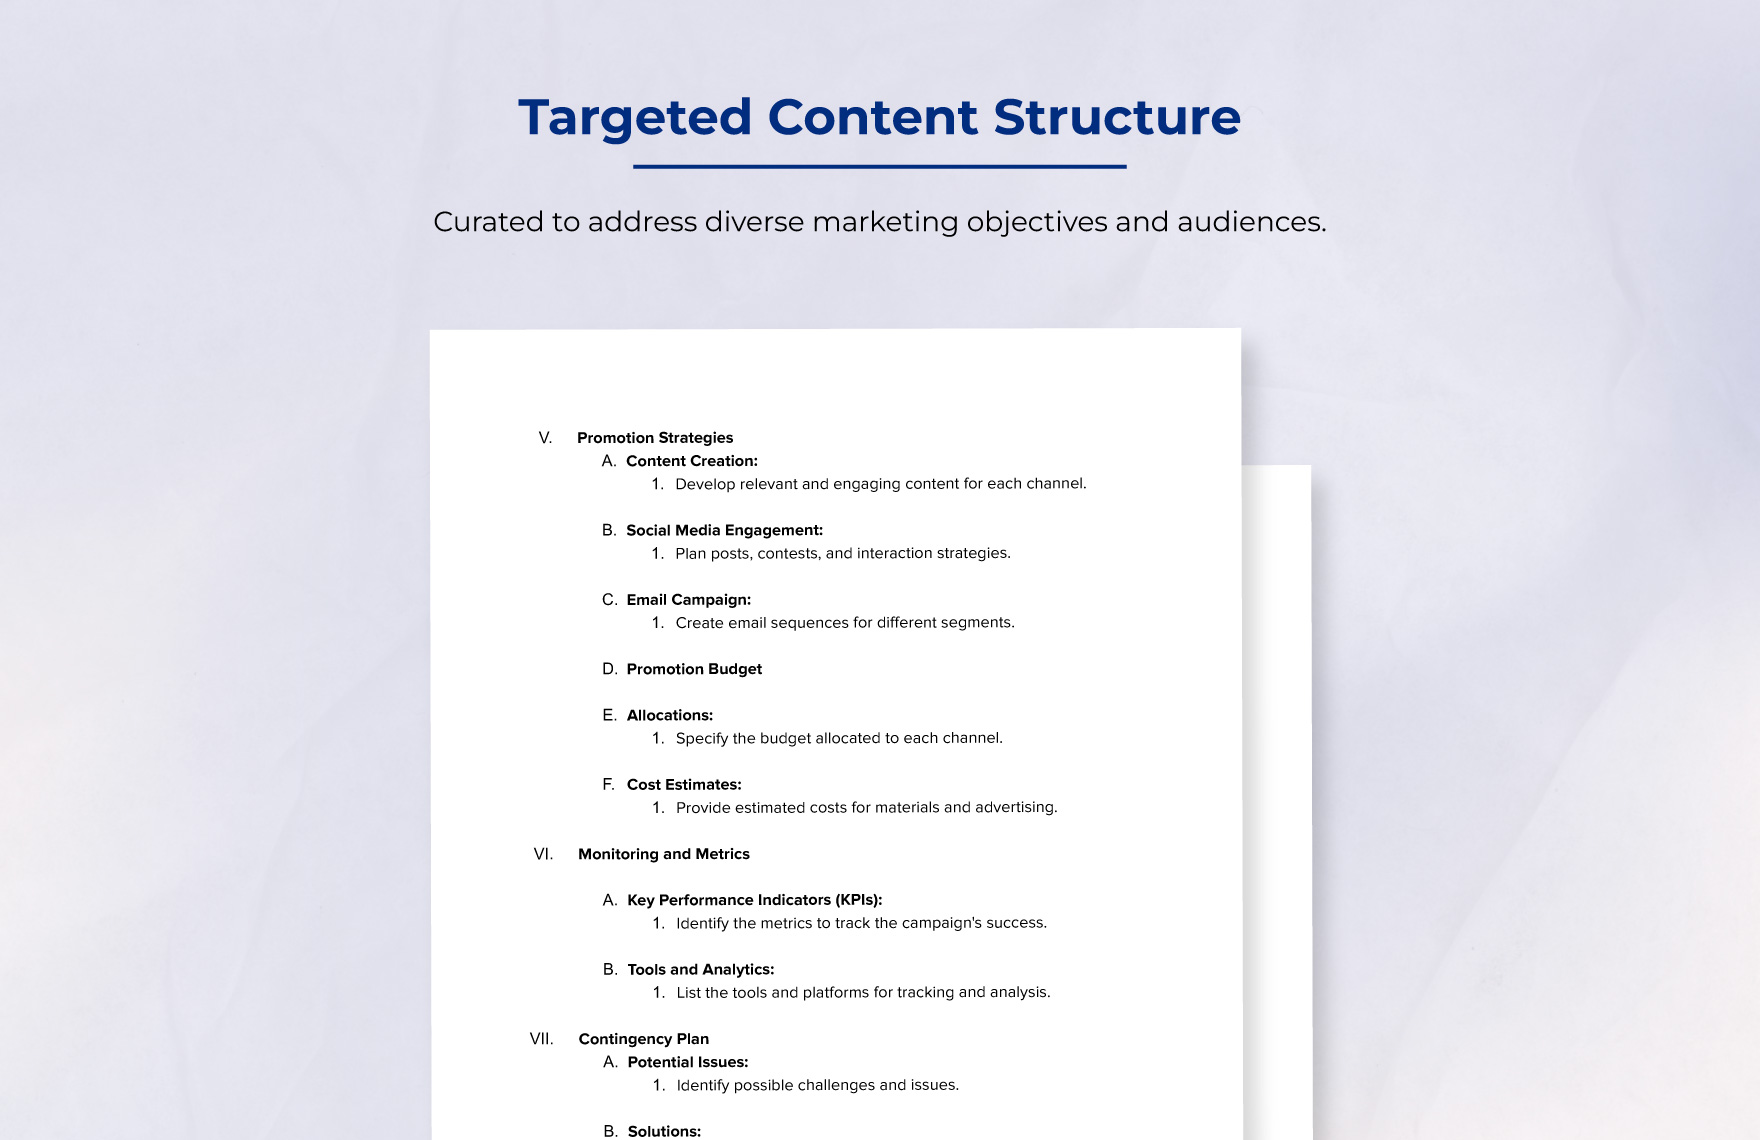 Marketing Product Promotion Plan Outline Template